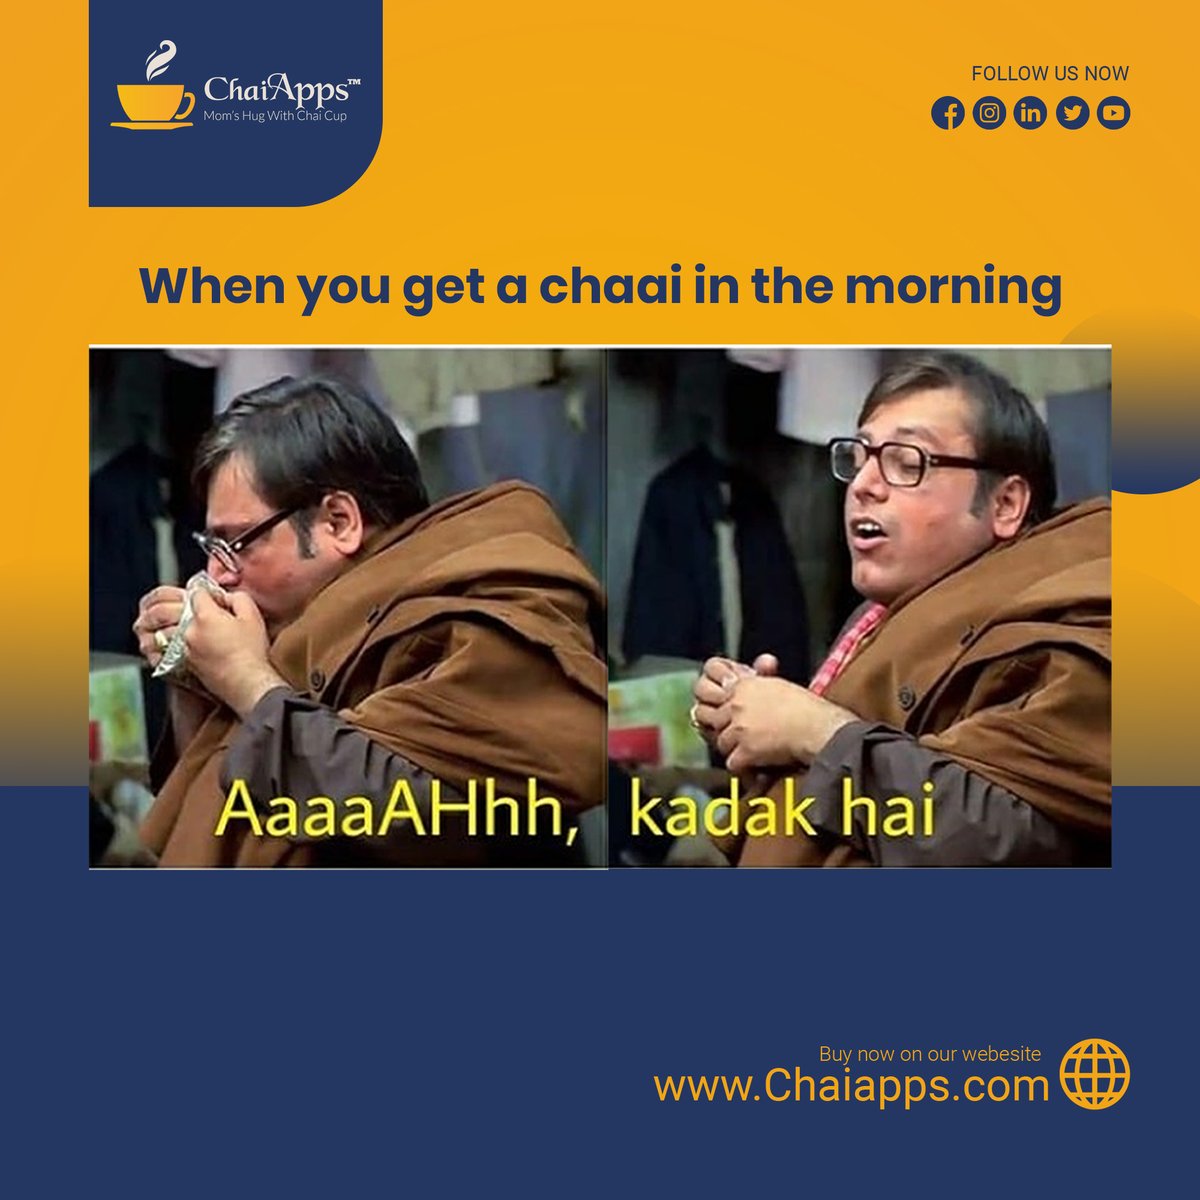 Kadak hai, it's time for morning tea! ☕️

ChaiApps Amazing offers visit your nearby outlet in the morning.📍

#TeaTime #GoodMorning #ChaiApps #nearbycafe #teacafe #tealover #cafes #teamems #herapherimemes #teatime #morning #teaoutlet #bestcafe
#teapatner #chaiapps #chaiappscafe